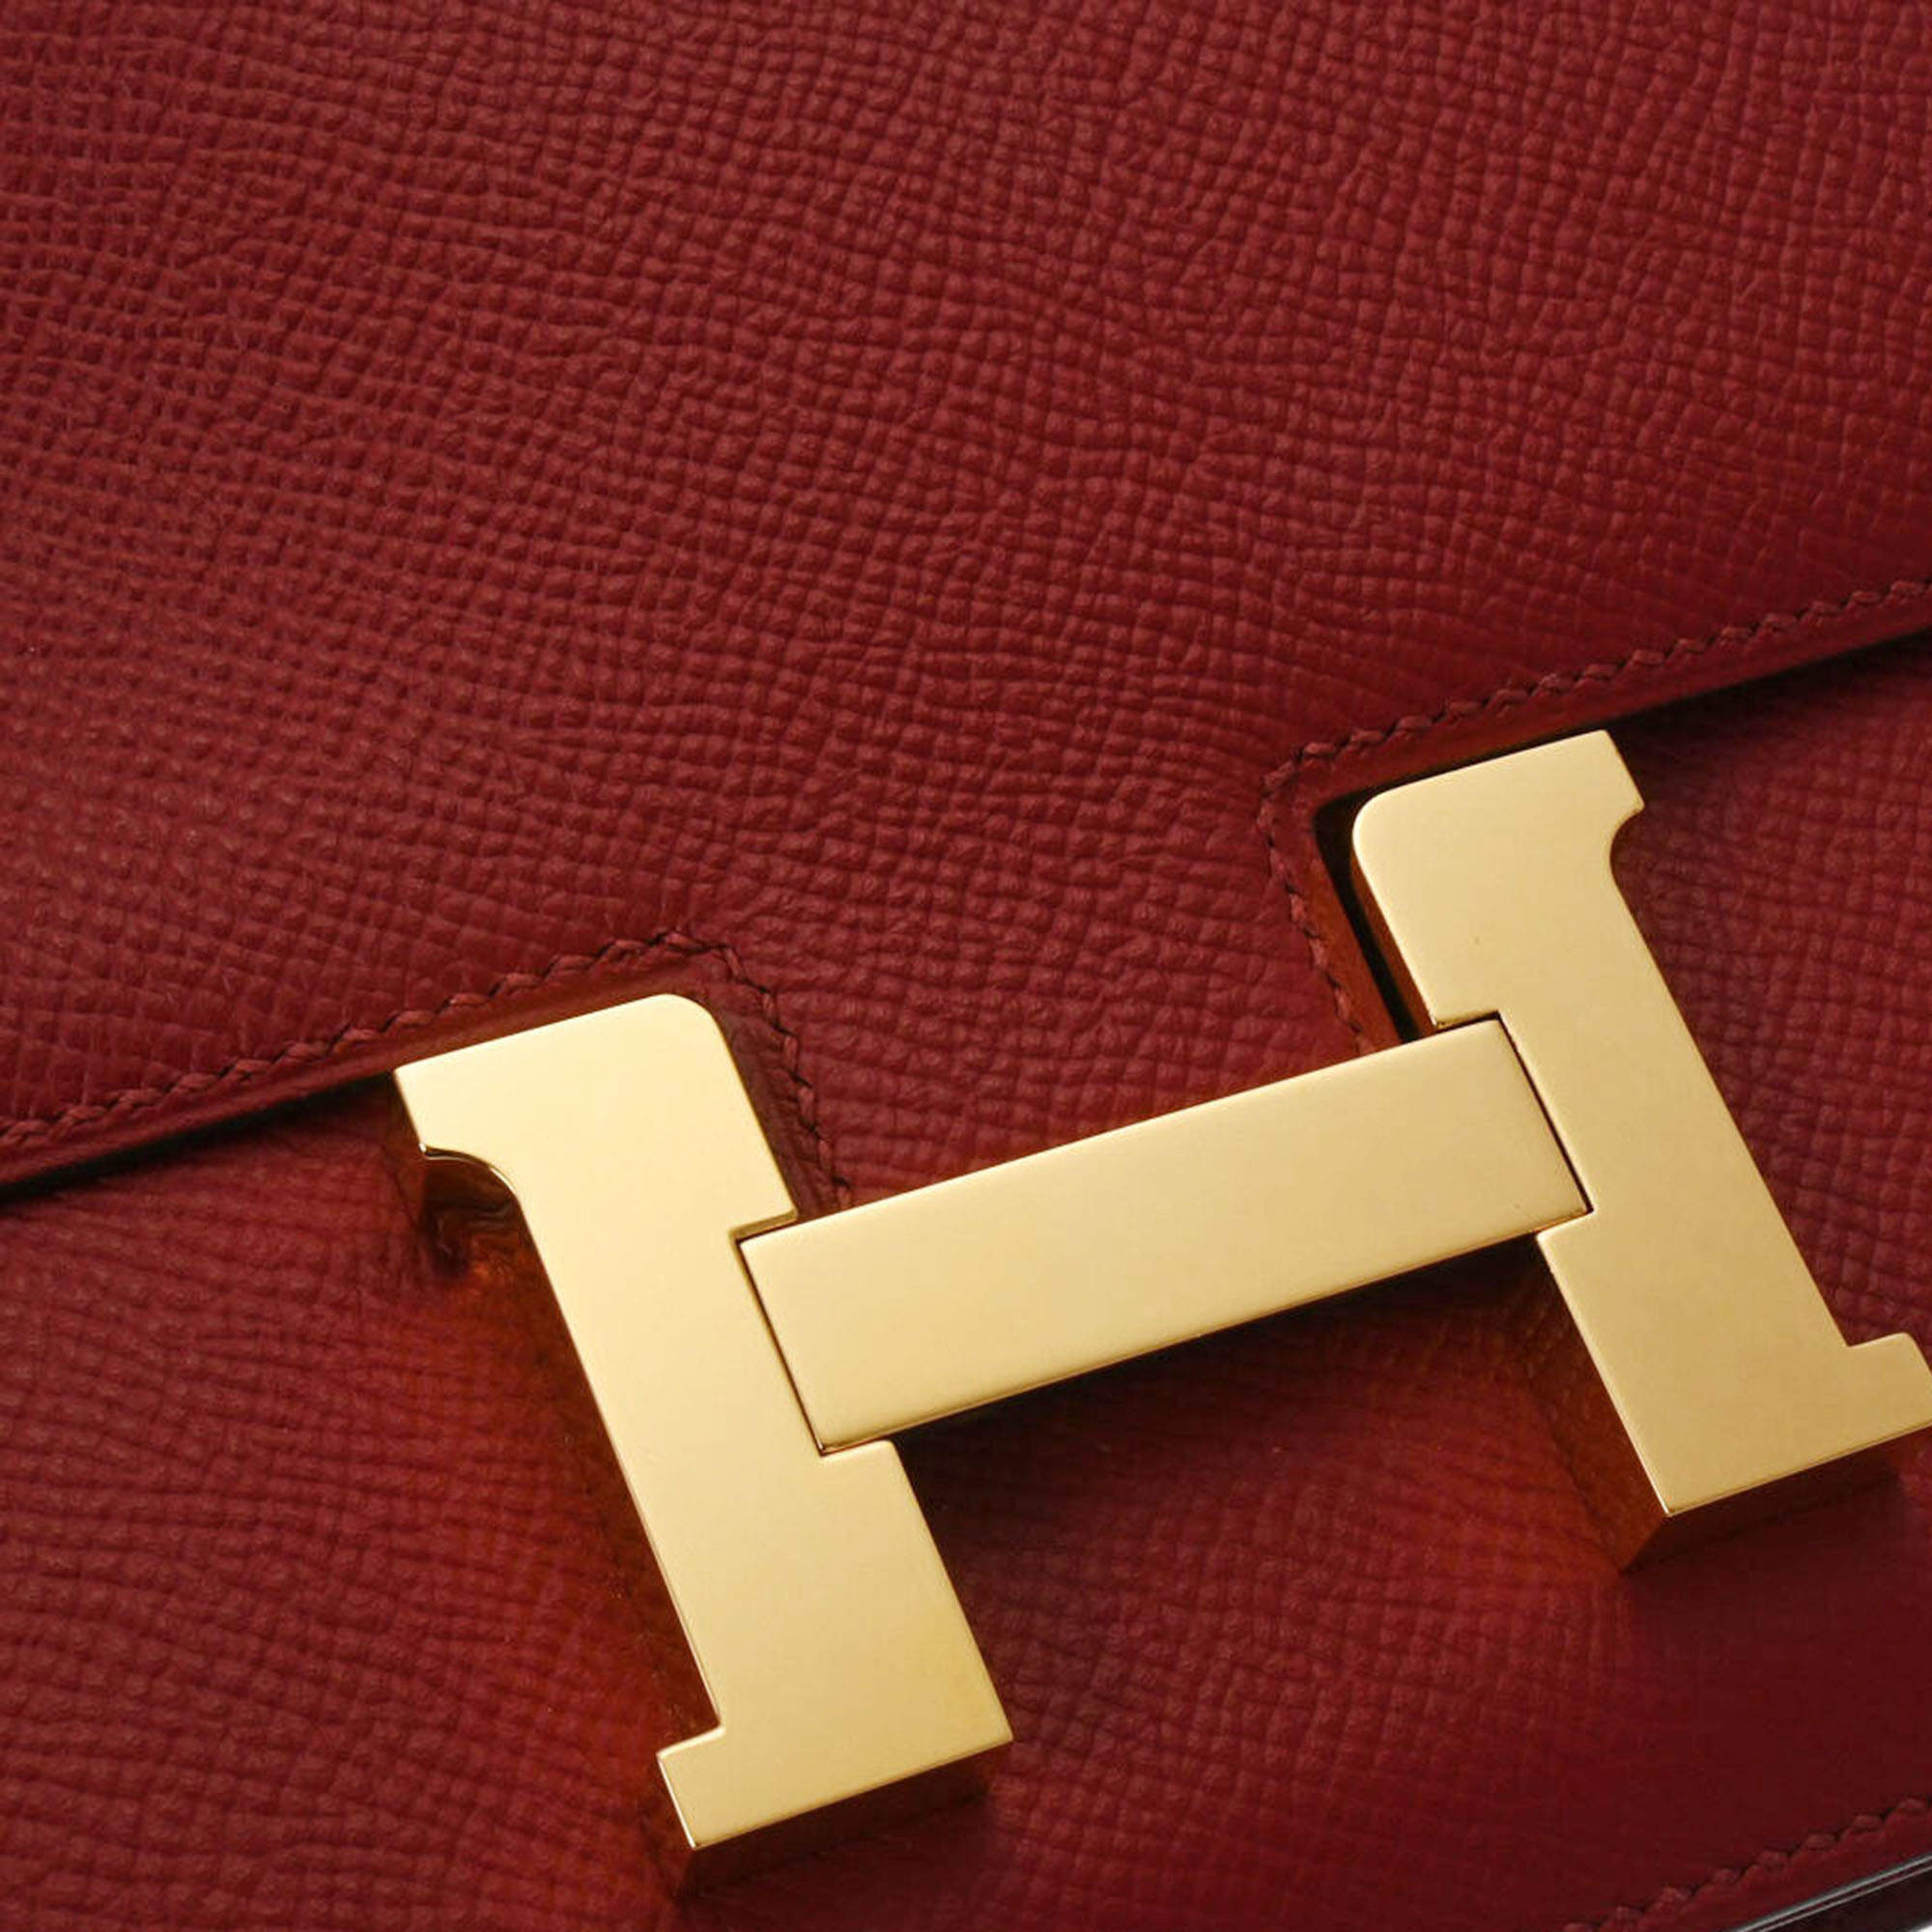 Constance clutch bag in leather HERMÈS  Hermes handbags, Bags, Red leather  handbags